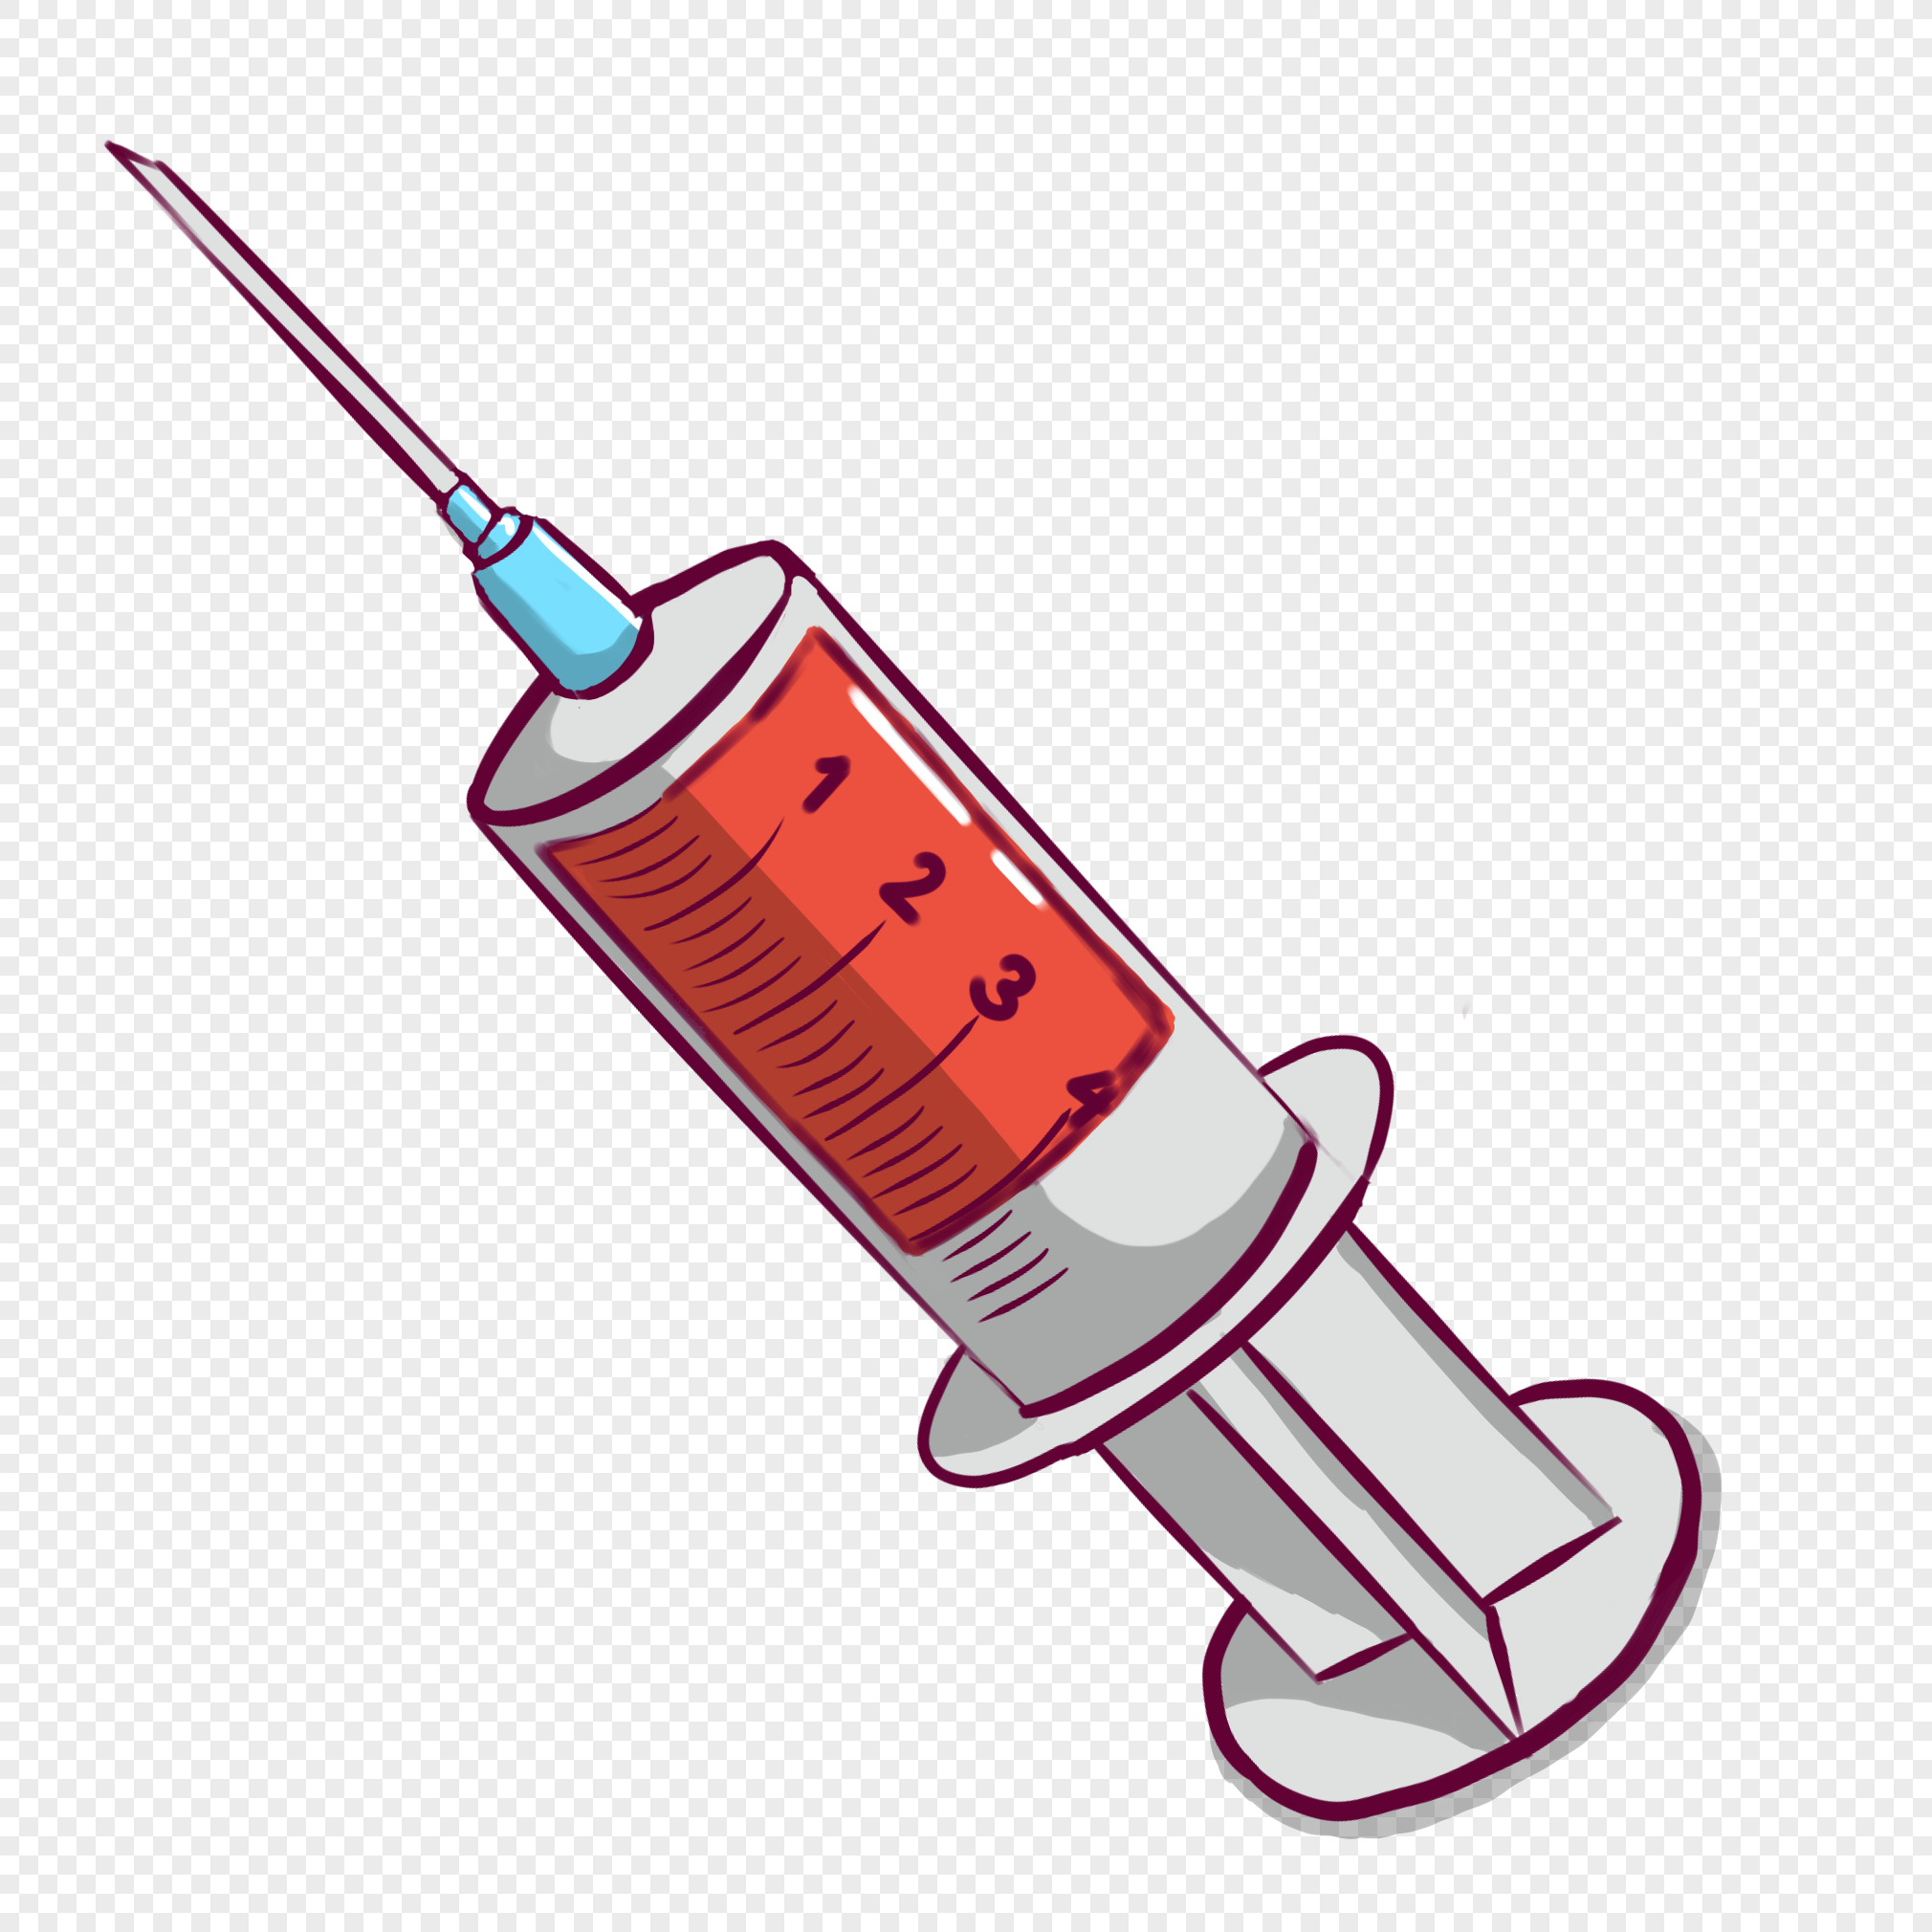 Needle png image_picture free download